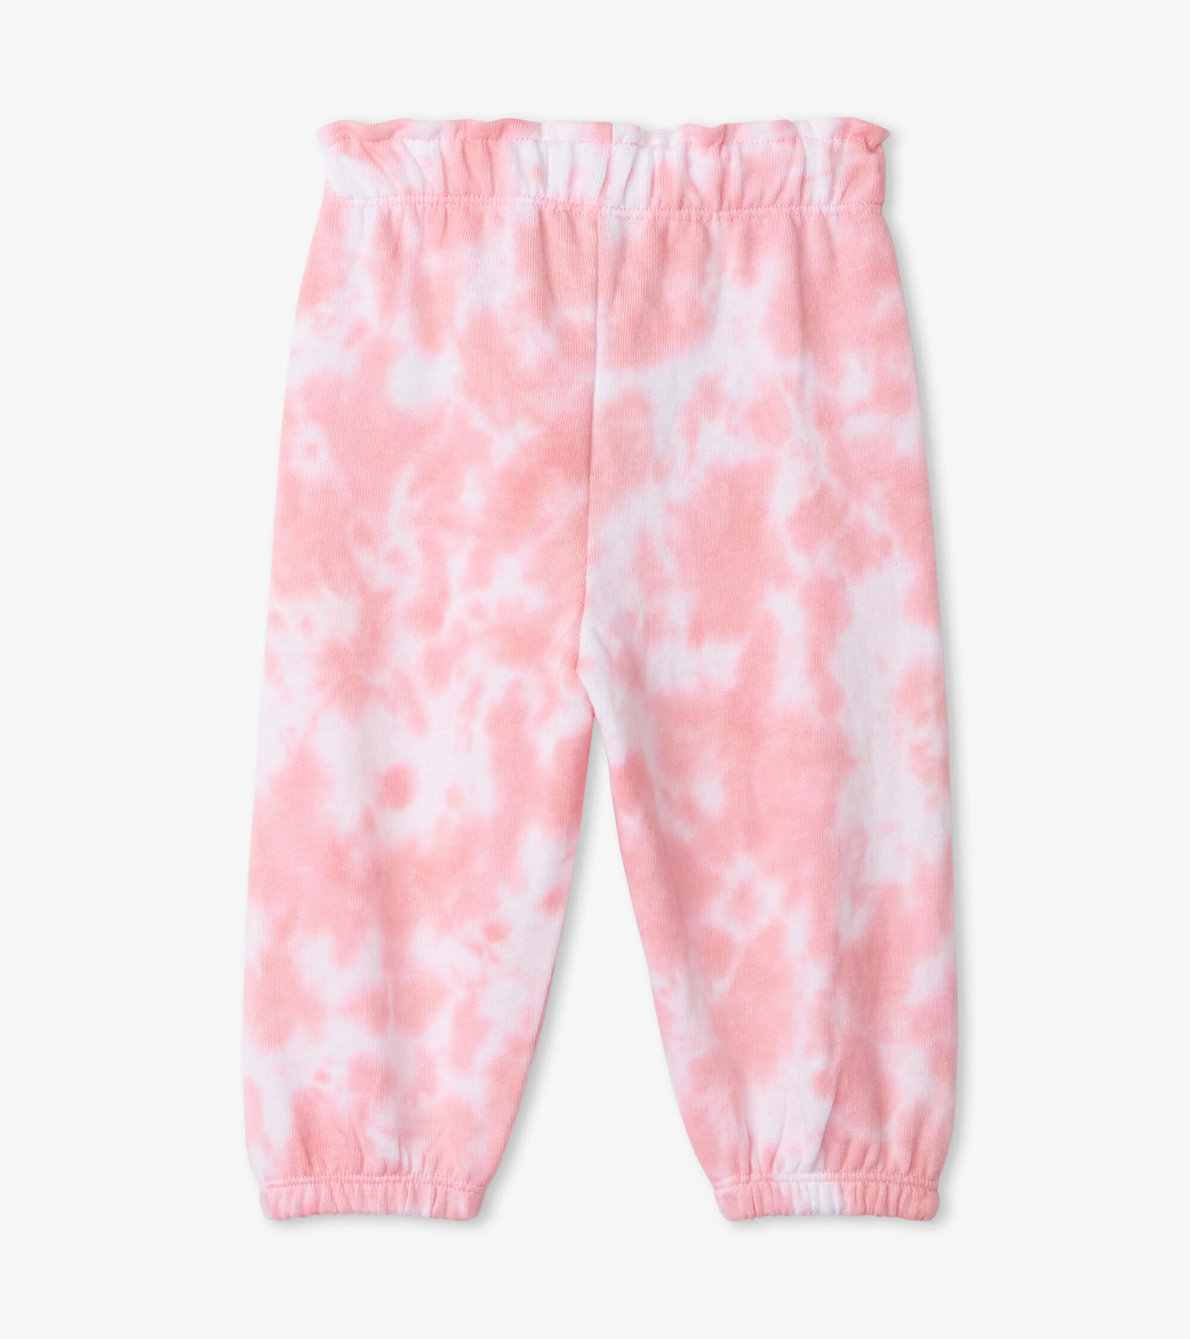 View larger image of Pink Tie Dye Baby Joggers